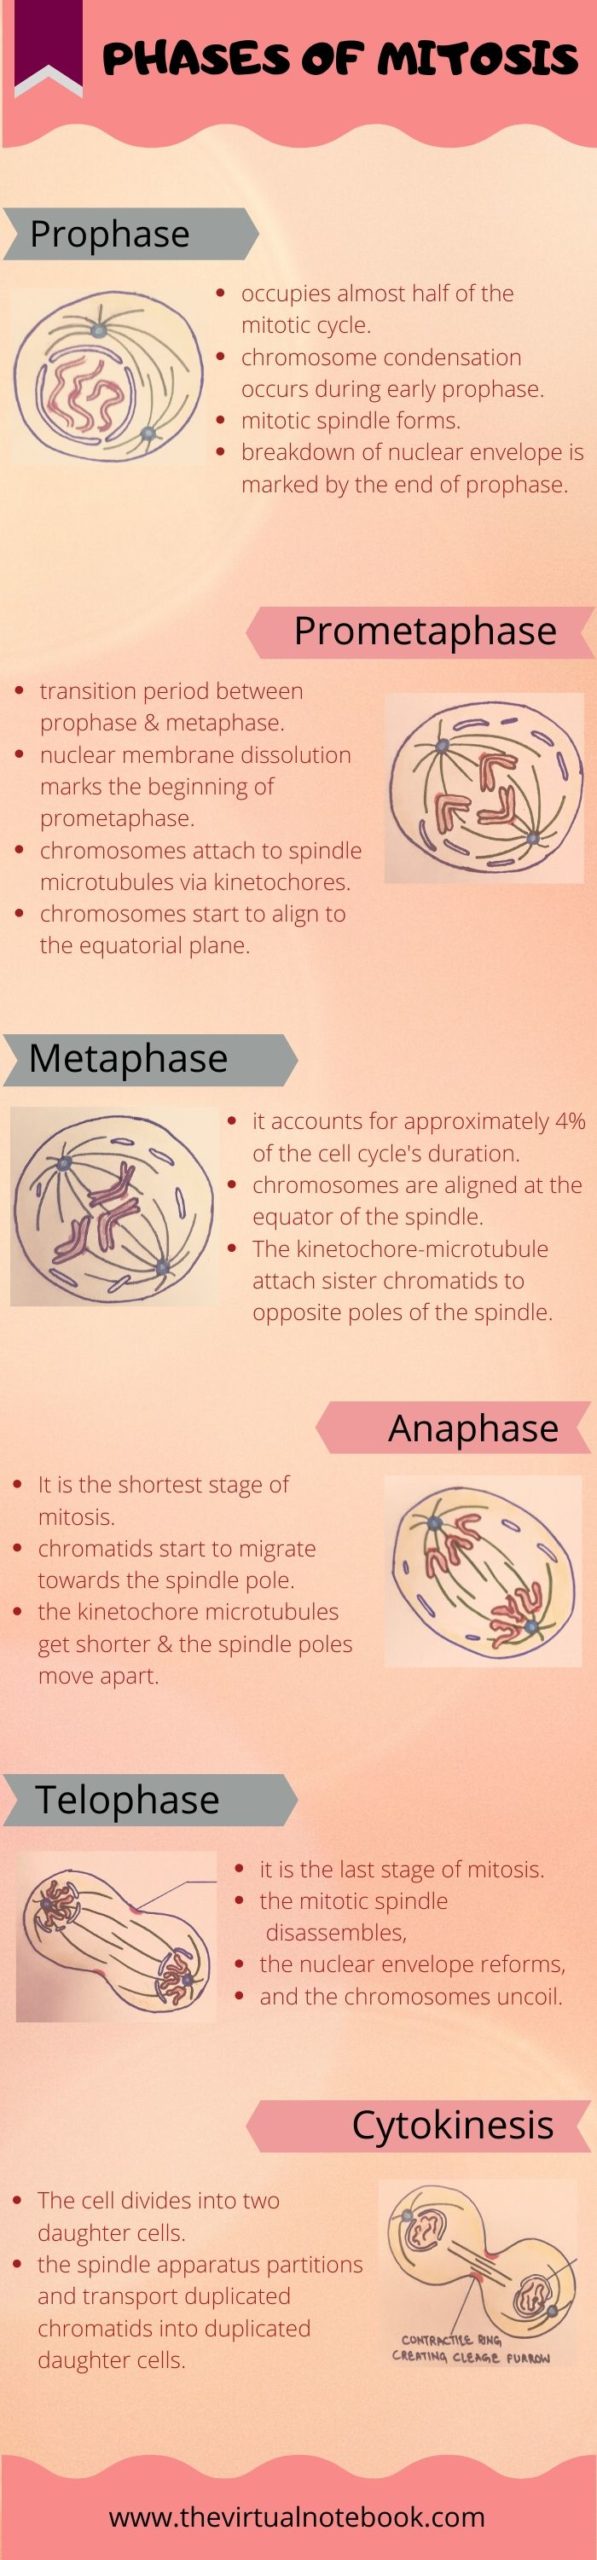 infographic of cell cycle